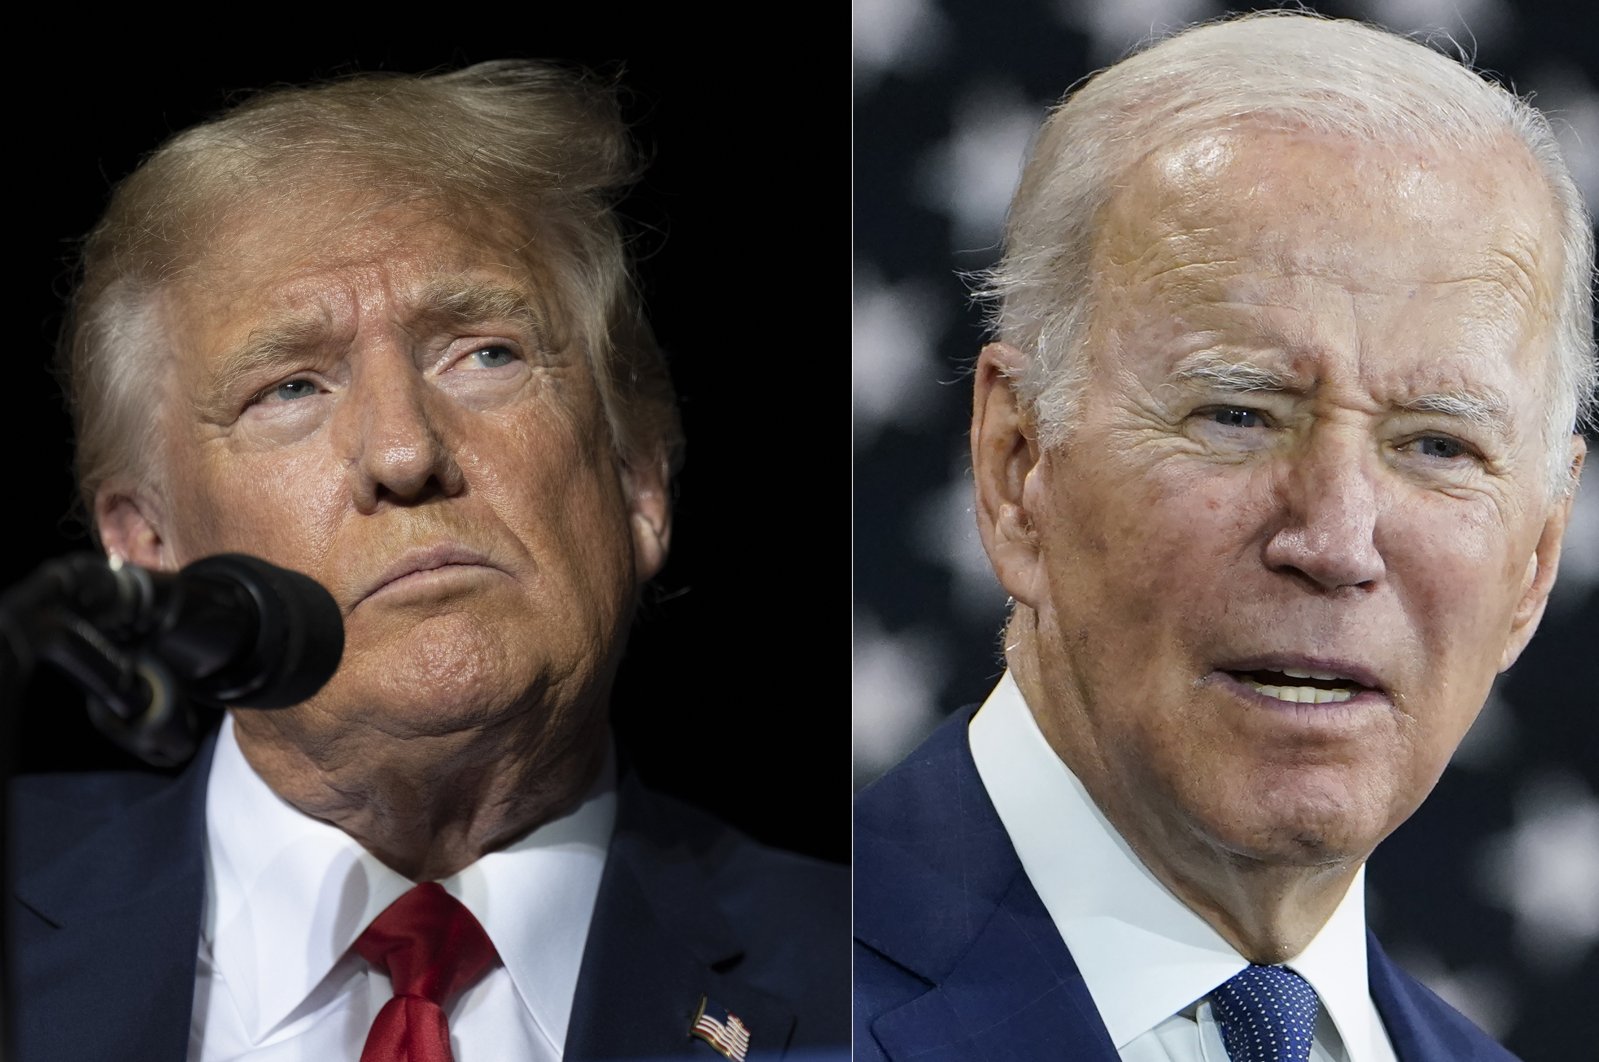 This combination of photos shows former President Donald Trump, left, and President Joe Biden, right. (AP File Photo)